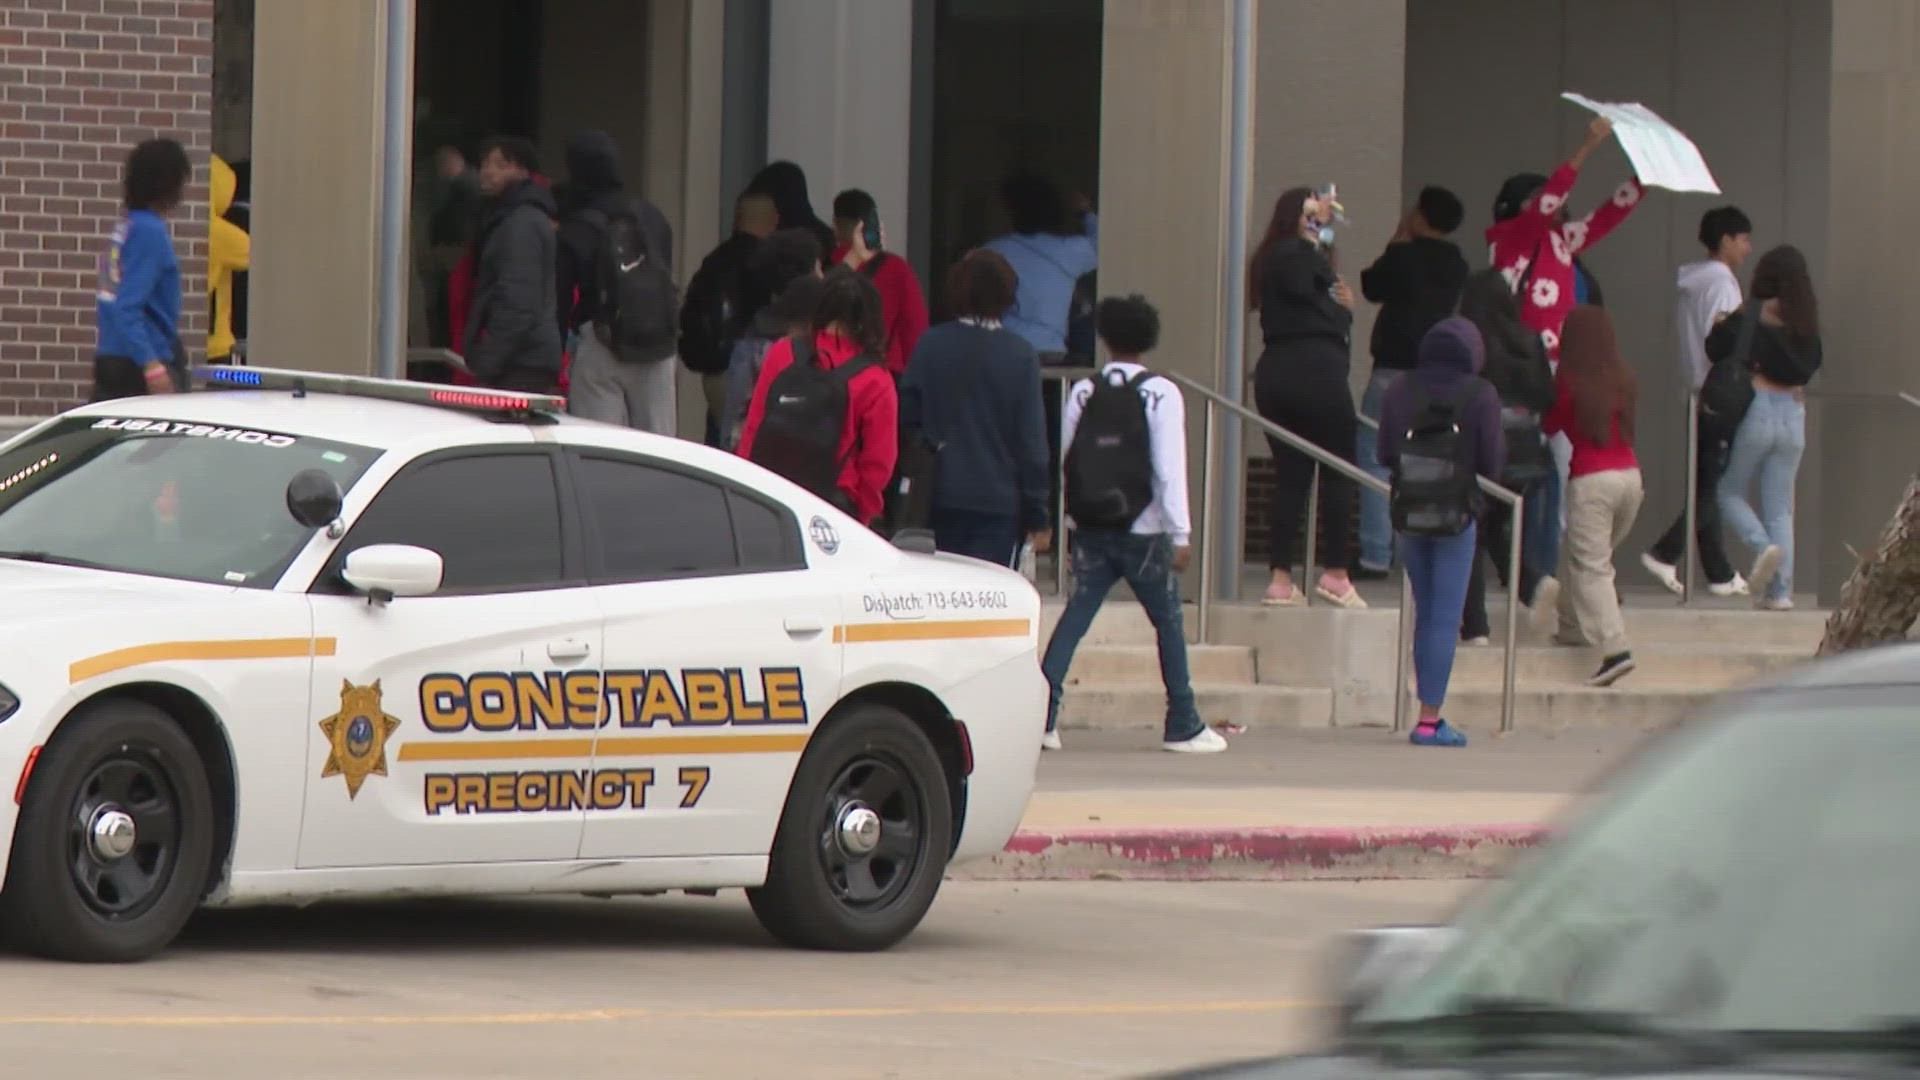 Students at the HISD school will have to leave their phones at home or turn them into the front office before heading to class. The principal blamed recent fights.